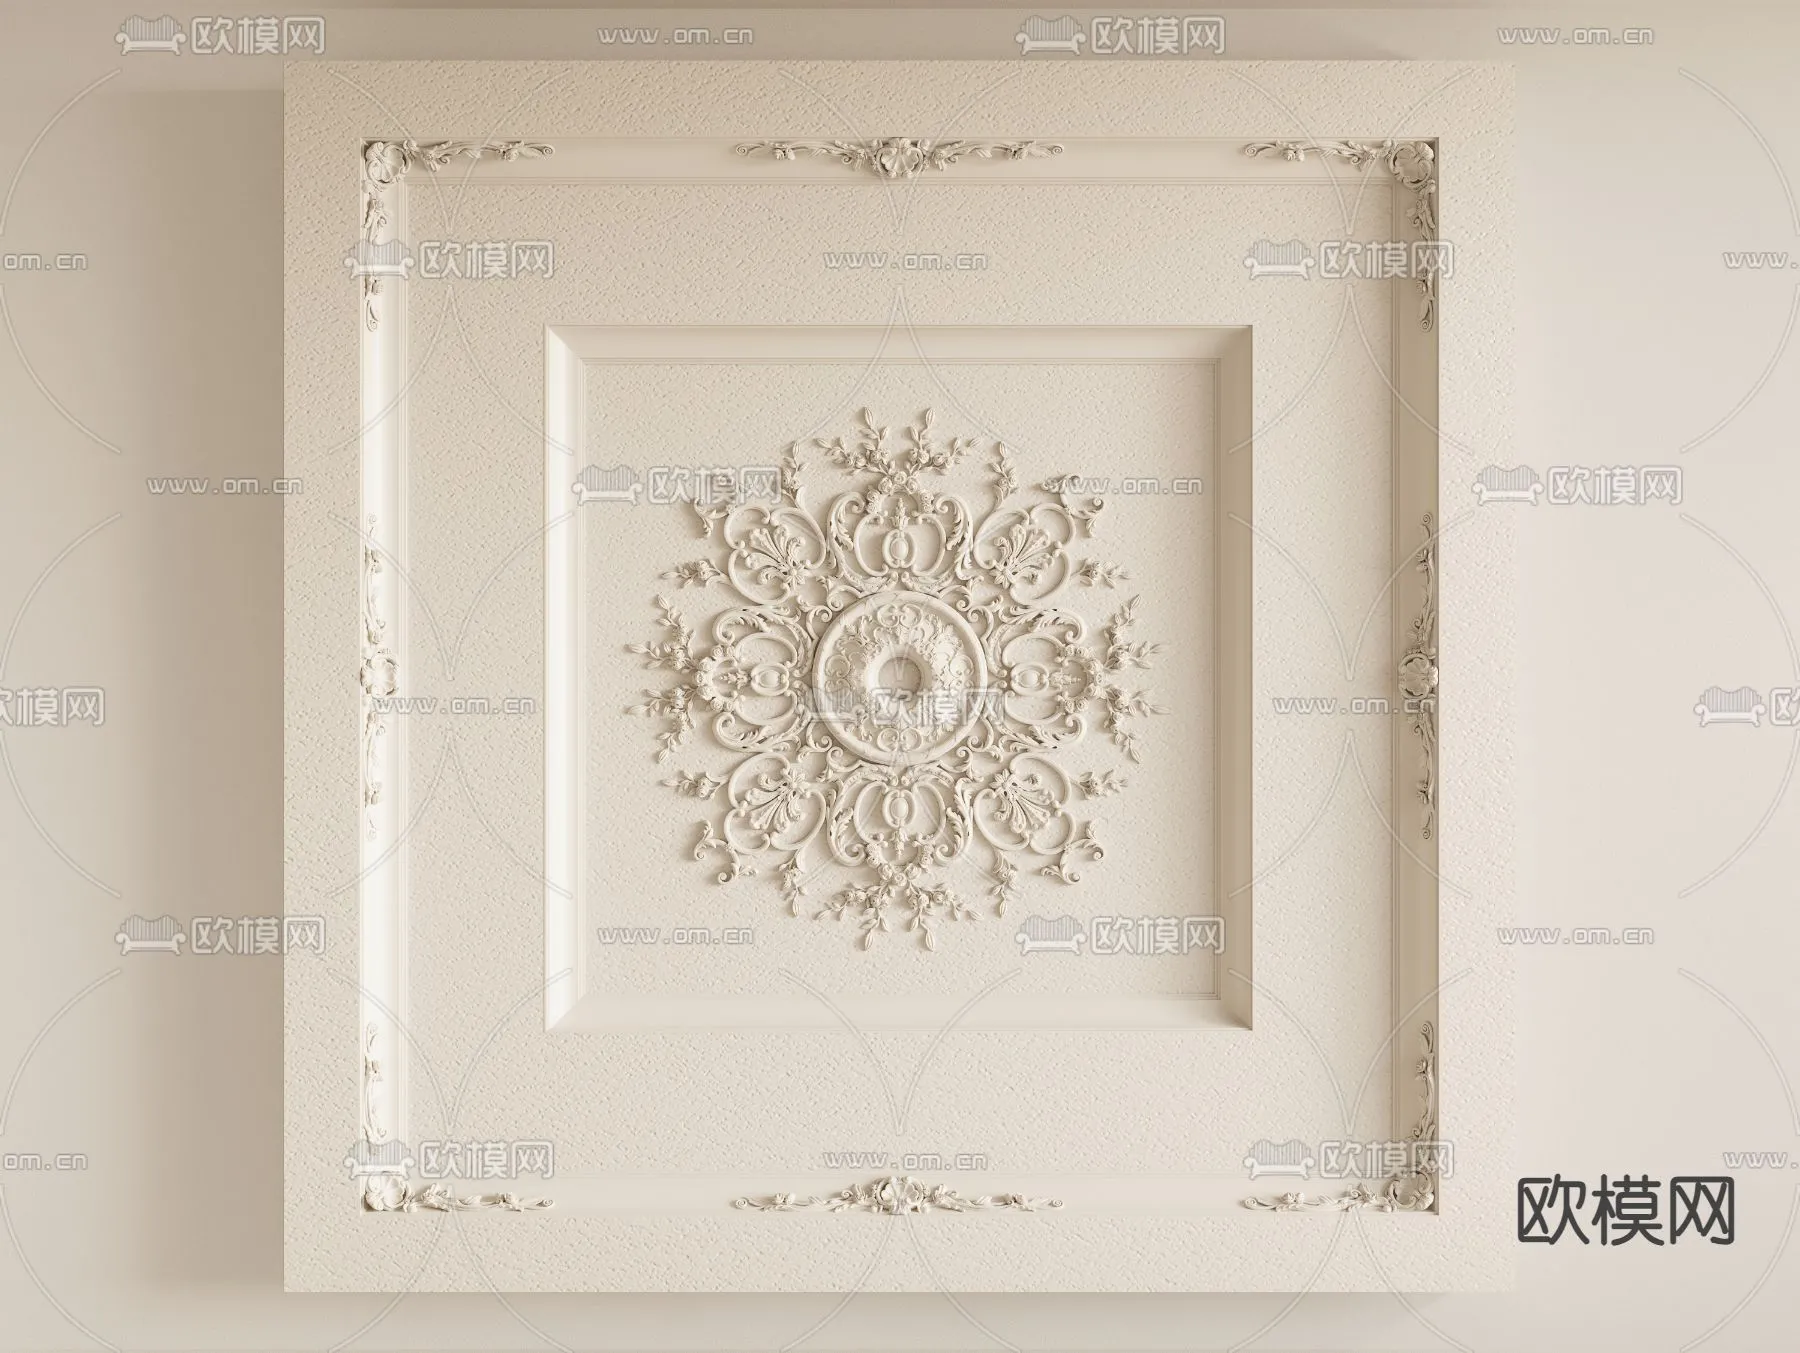 3DS MAX – DETAIL – CEILING – VRAY / CORONA – 3D MODEL – 3221